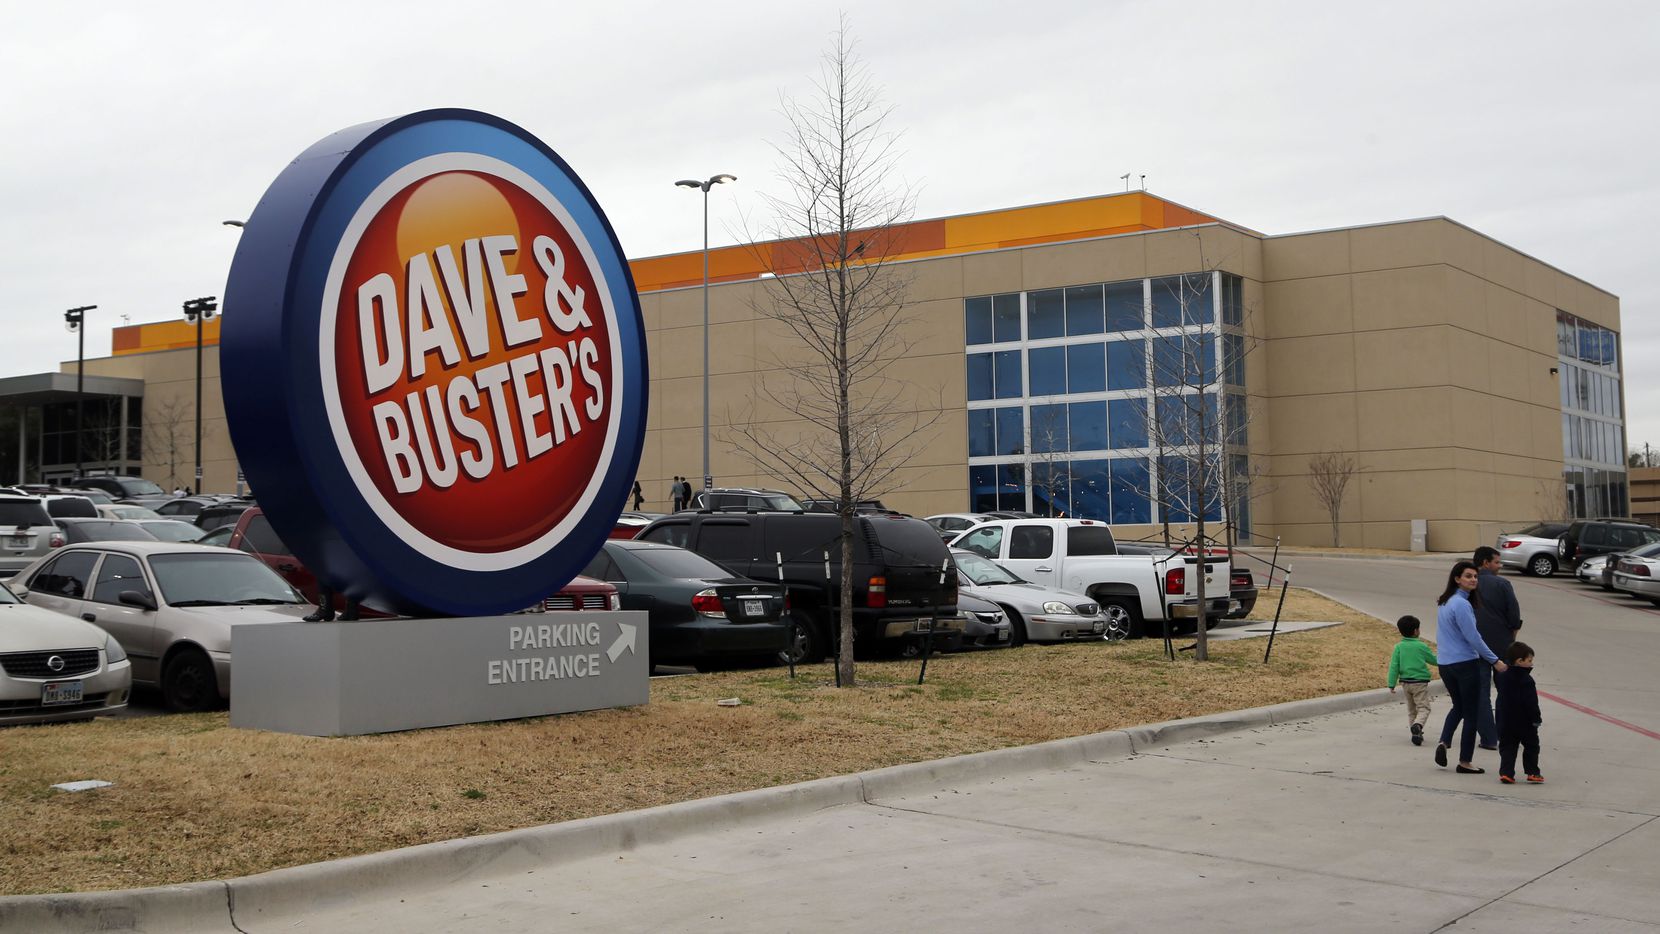 Though the new deal will give Dave & Buster’s breathing room, the company is still facing...